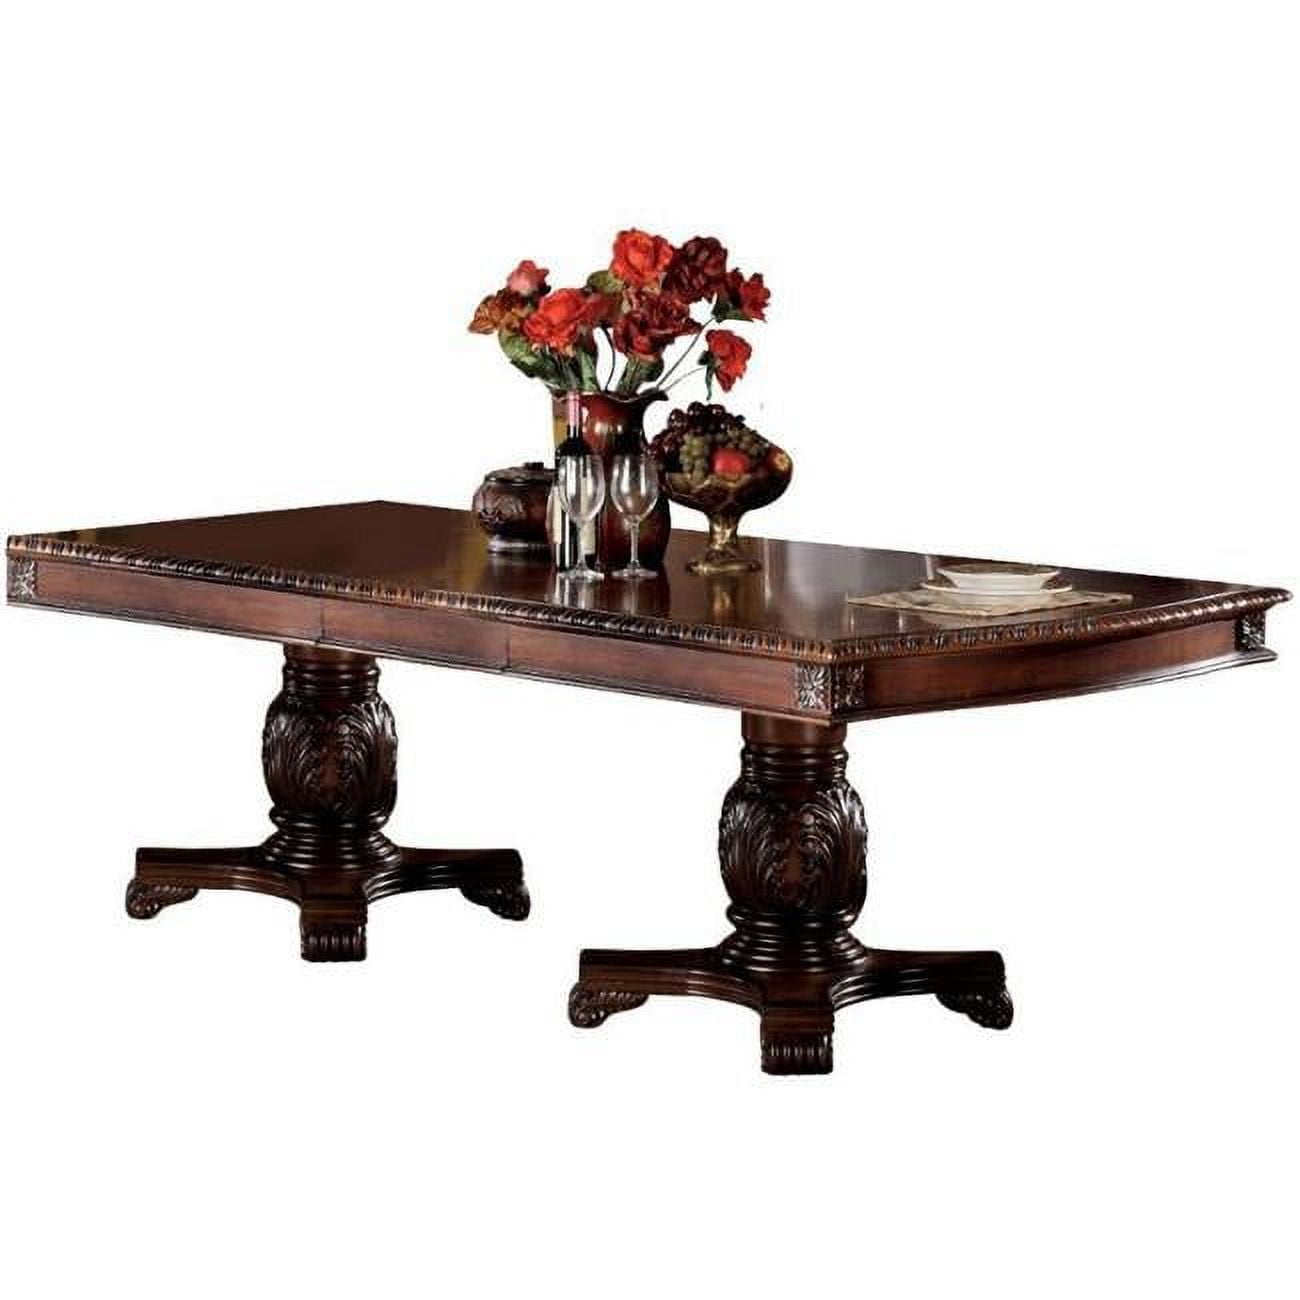 Picture of Acme Furniture 04075A 96 x 31 x 46 in. Chateau De Ville Dining Table with Double Pedestal, Cherry - Case of 2